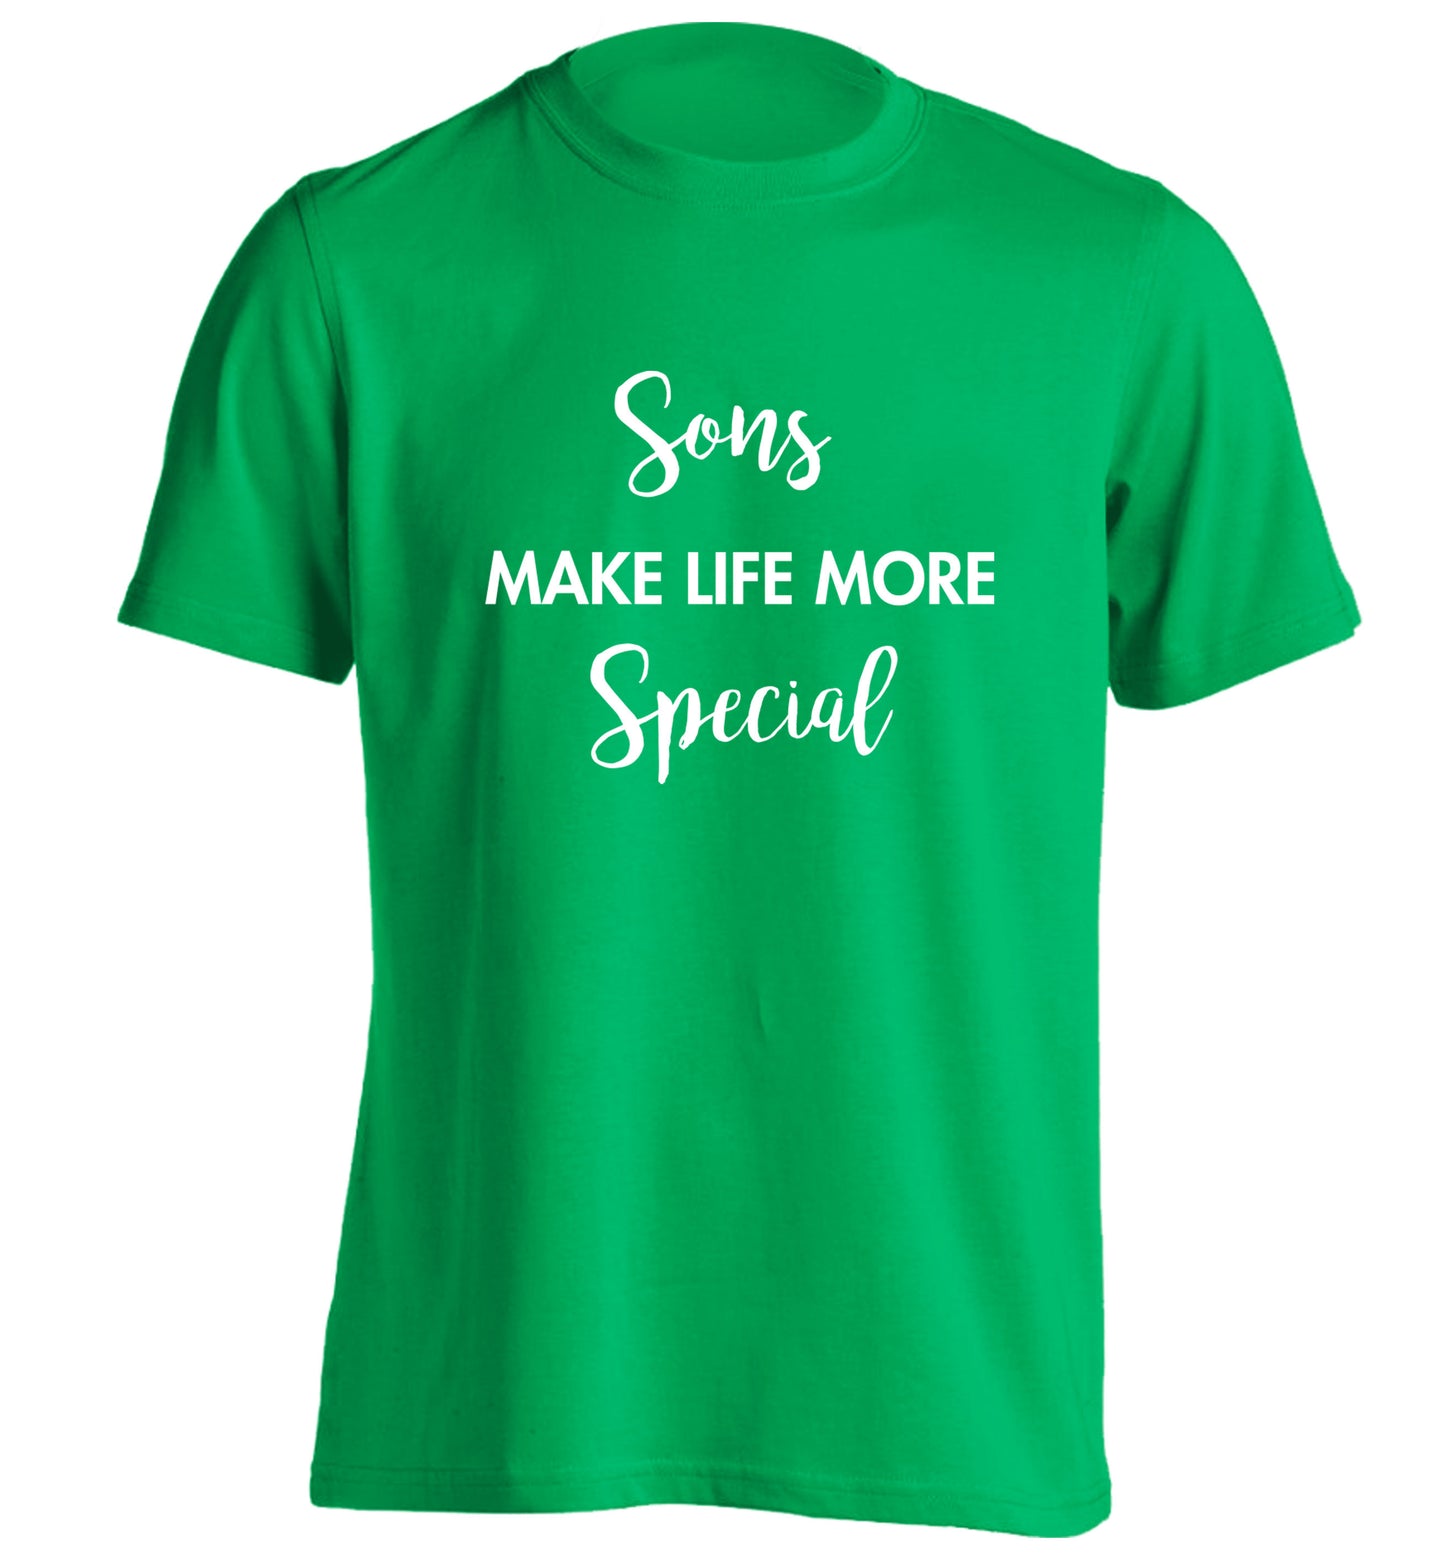 Daughters make life more special adults unisex green Tshirt 2XL